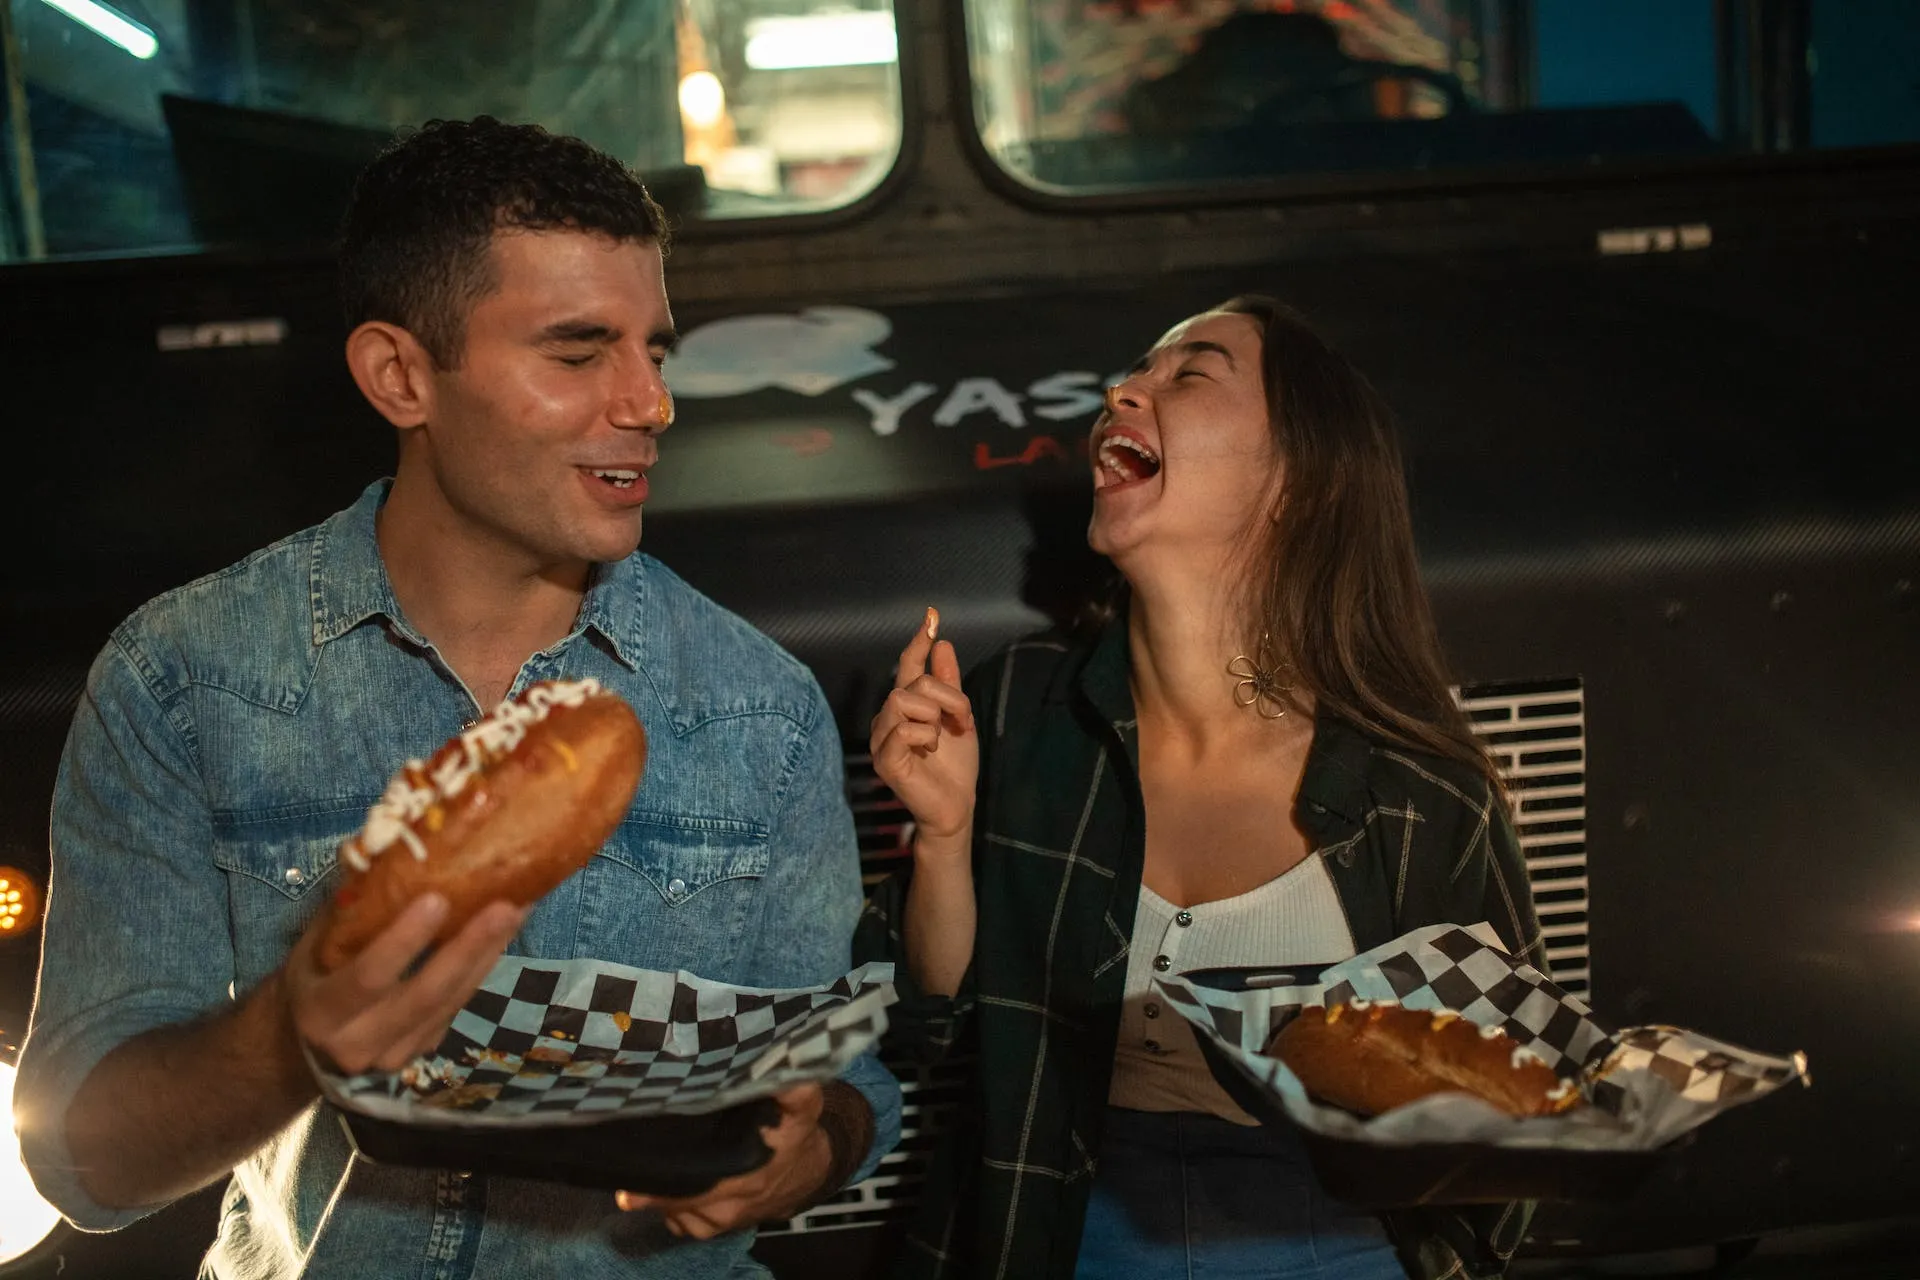 a couple laughs and enjoys street food in front of van